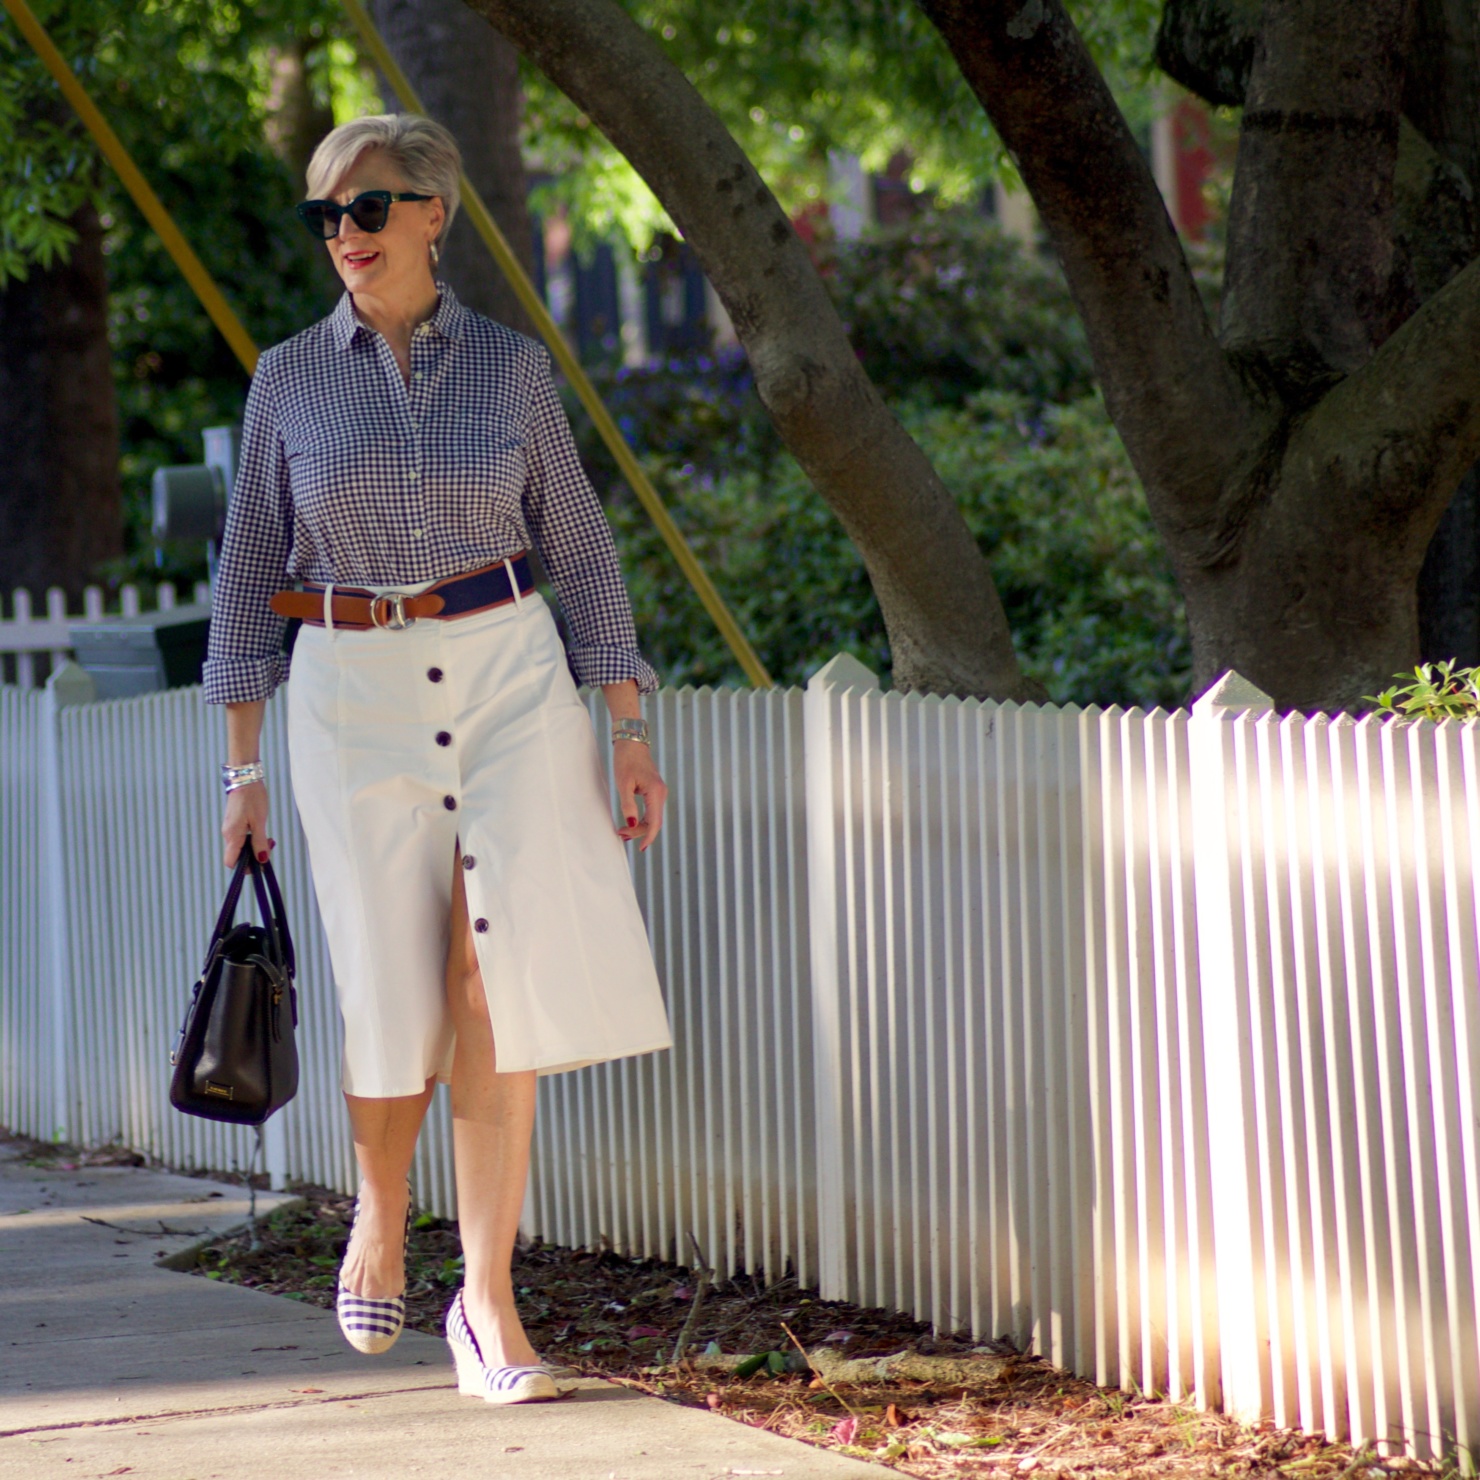 beth from Style at a Certain Age wears a midi skirt from JC Penney